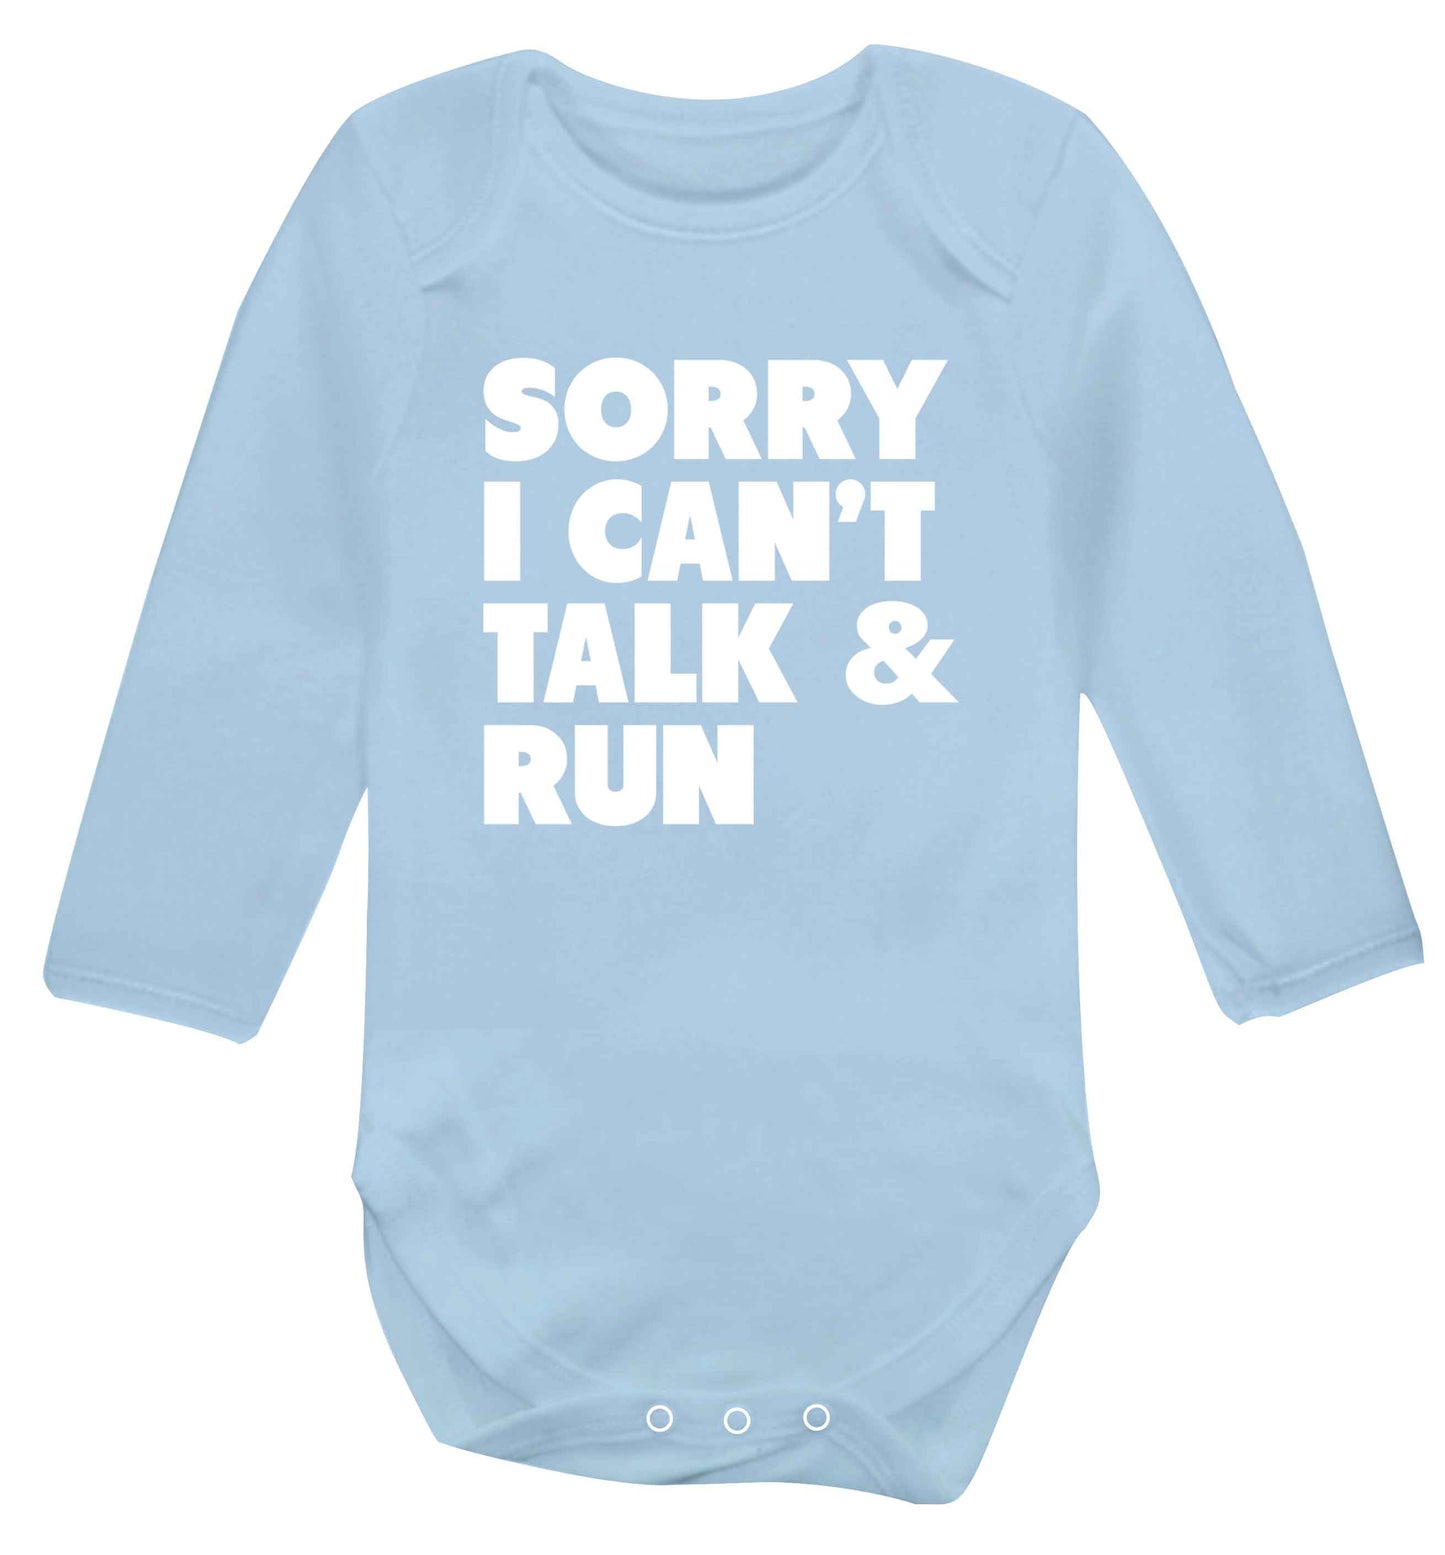 Sorry I can't talk and run baby vest long sleeved pale blue 6-12 months